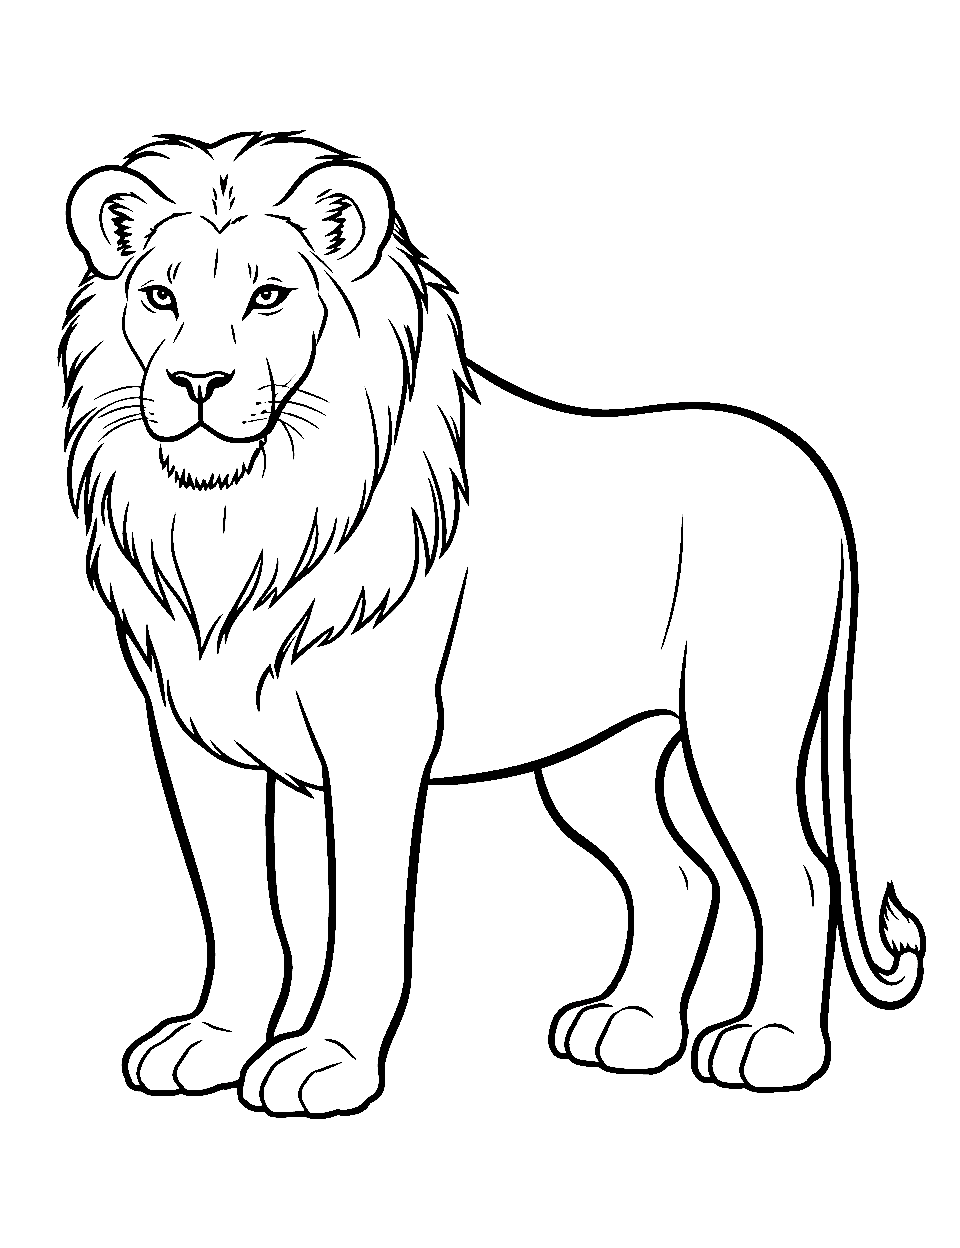 how to draw and colour lion 2016 | learn to draw lion - YouTube